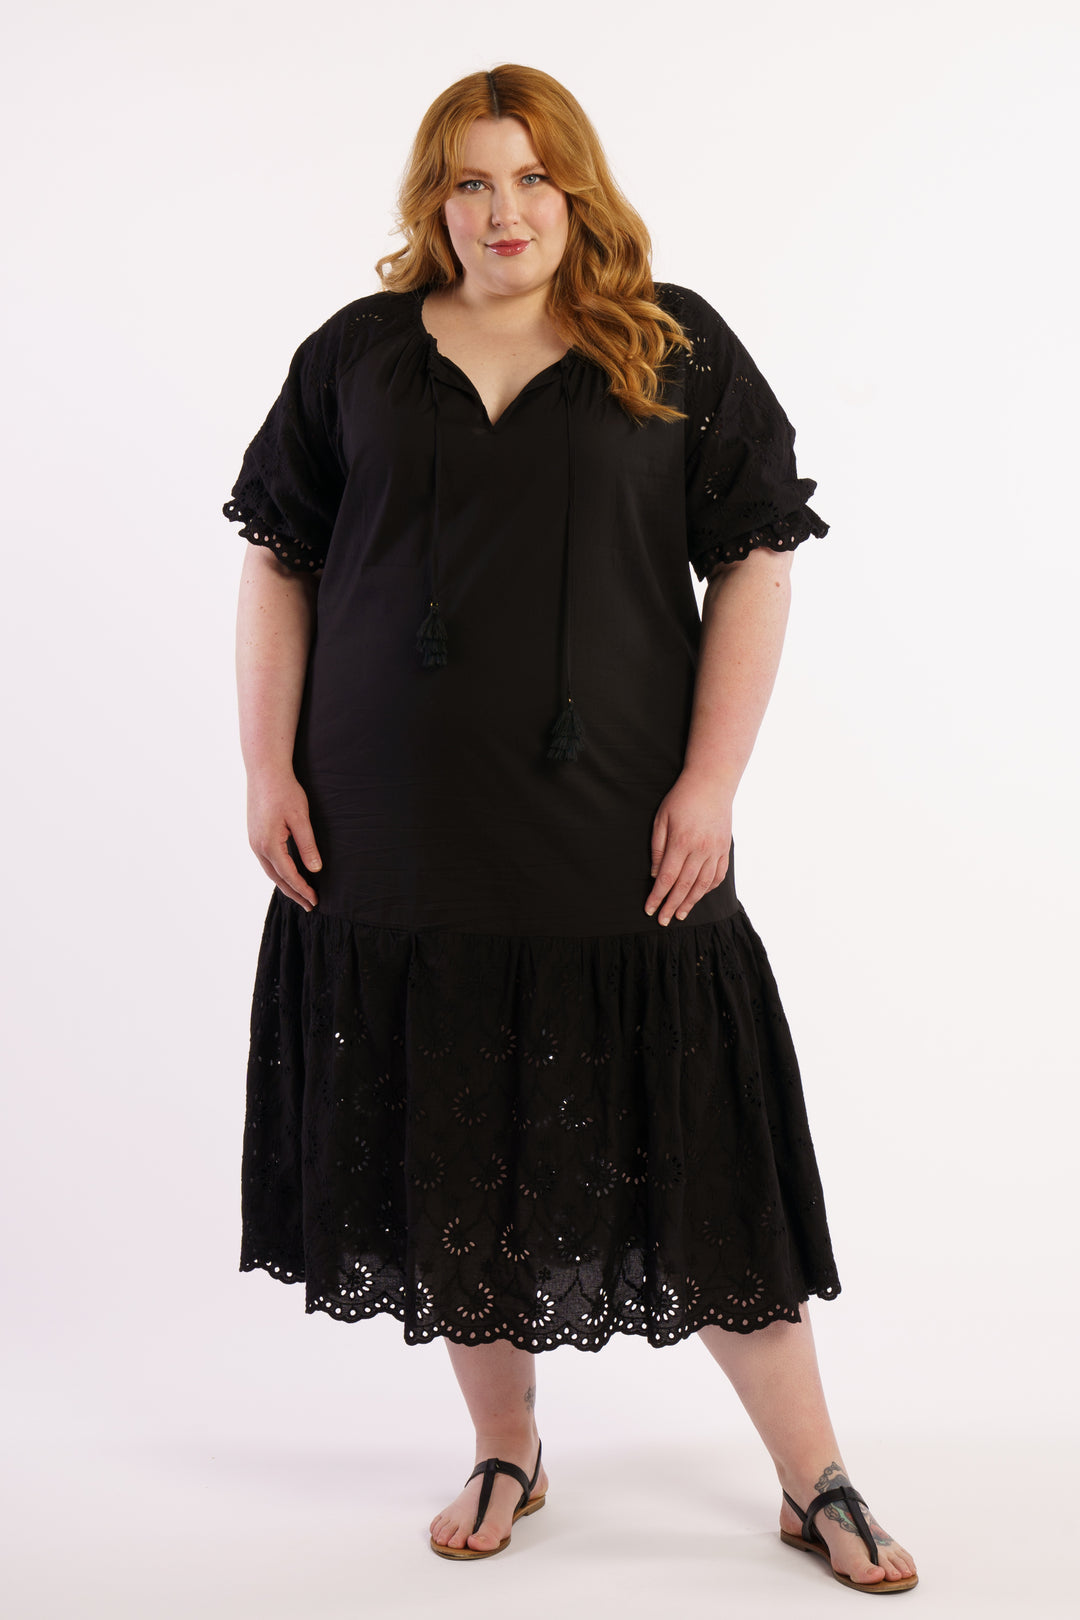 Summer Breeze Broidery Dress - Black - STOCK AVAILABLE -  S (14/16)